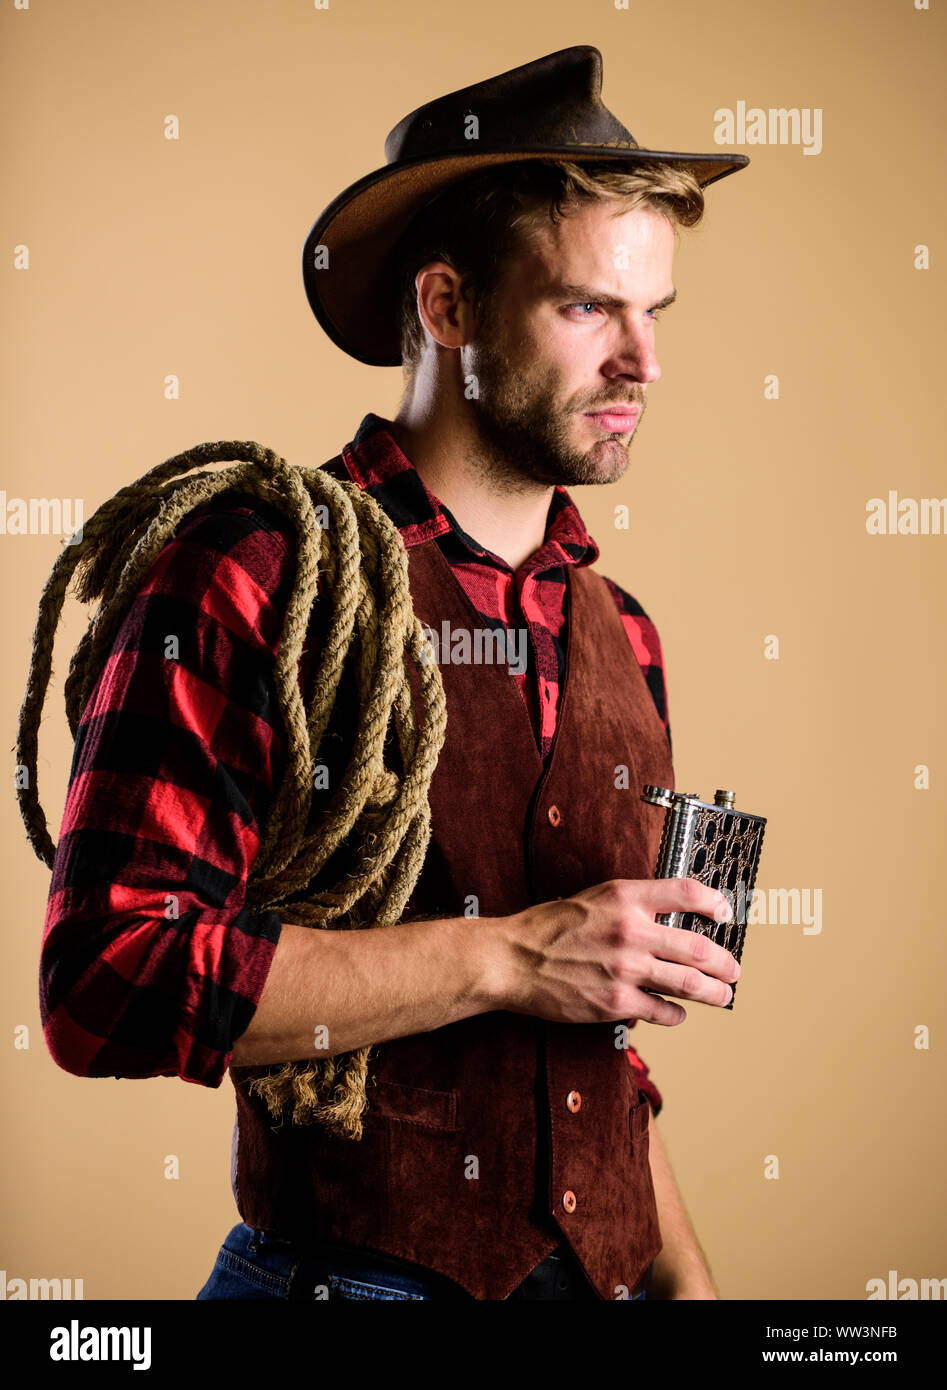 Sheriff concept. Bourbon whiskey. Western culture. Man wearing hat hold ...